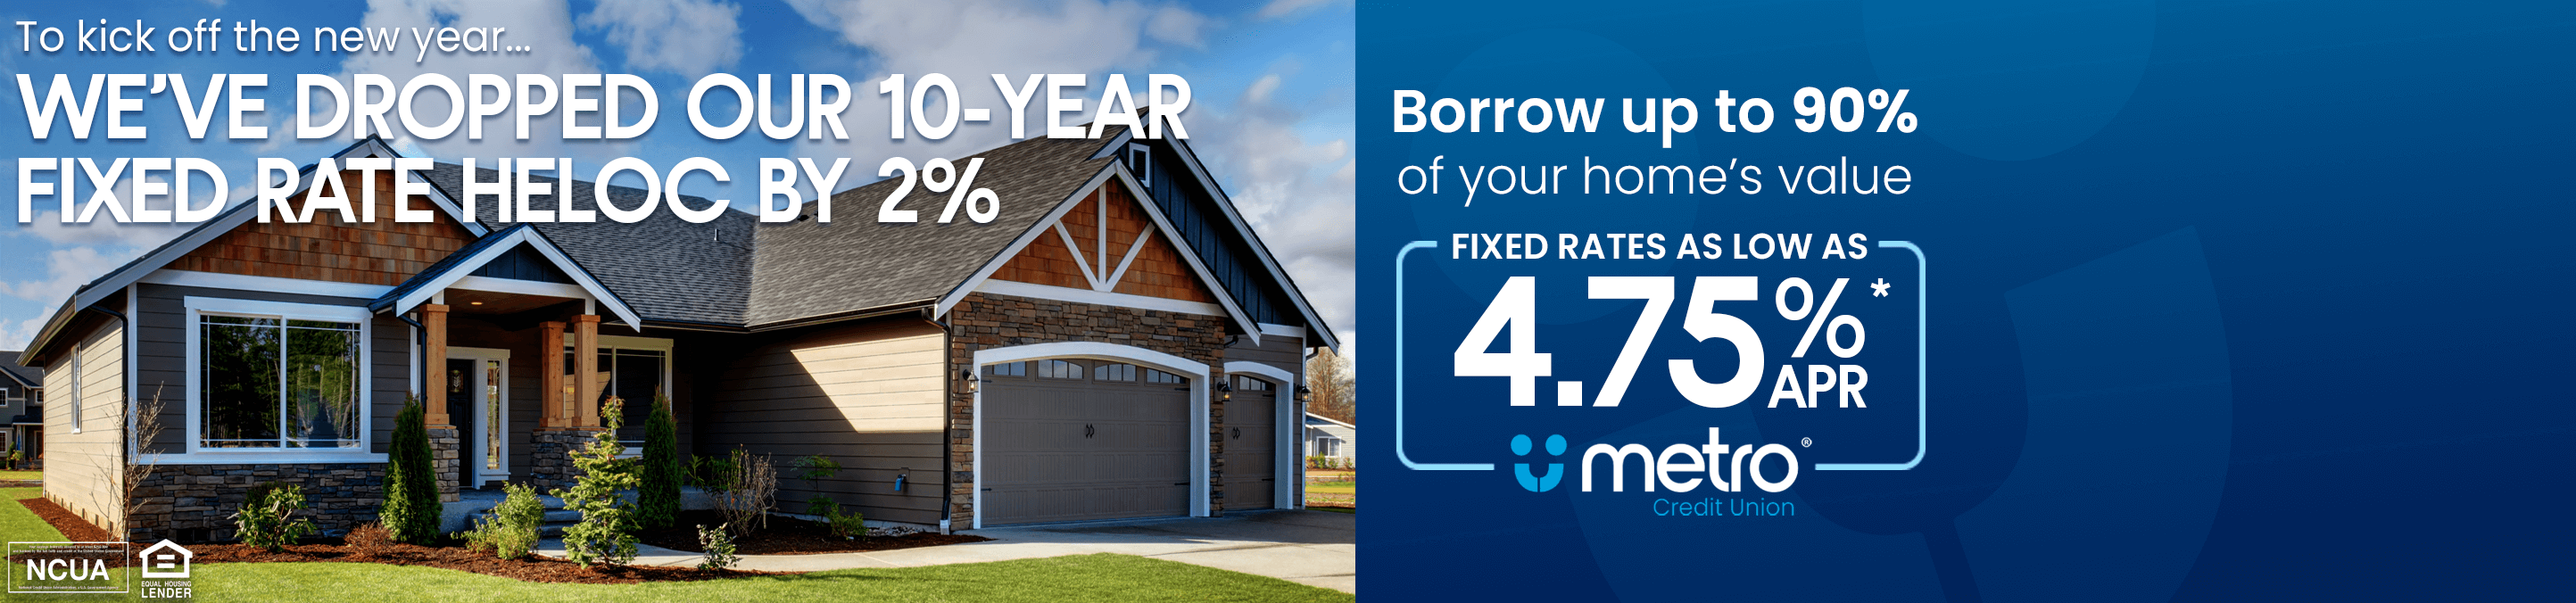 To kick off the new year we've dropped our 10-year fixed rate HELOC by 2%